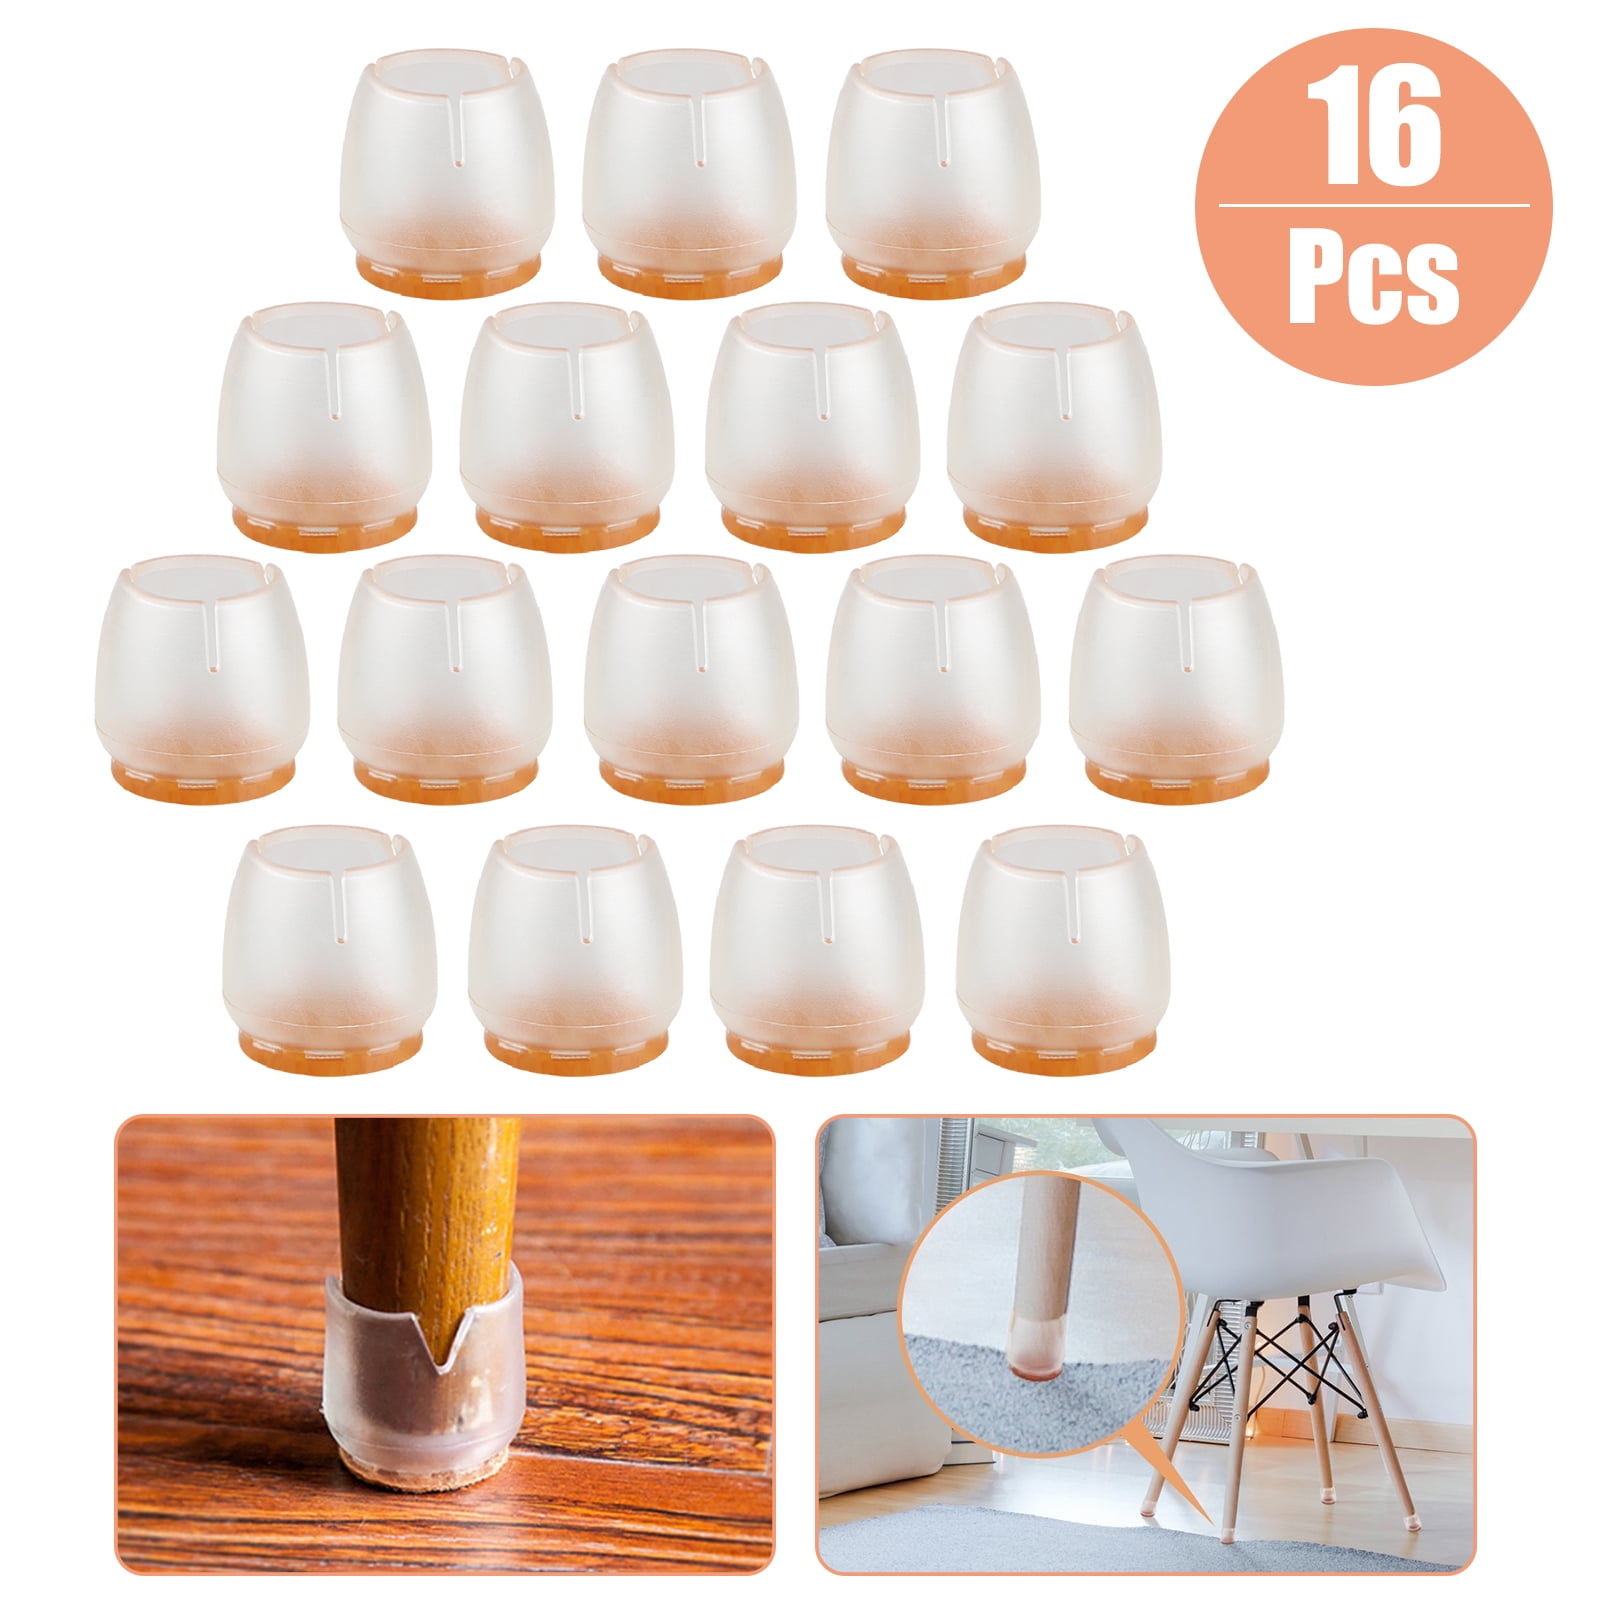 16 PCS Silicone Chair Leg Caps Feet Cover Pads Furniture Table Floor Protectors 